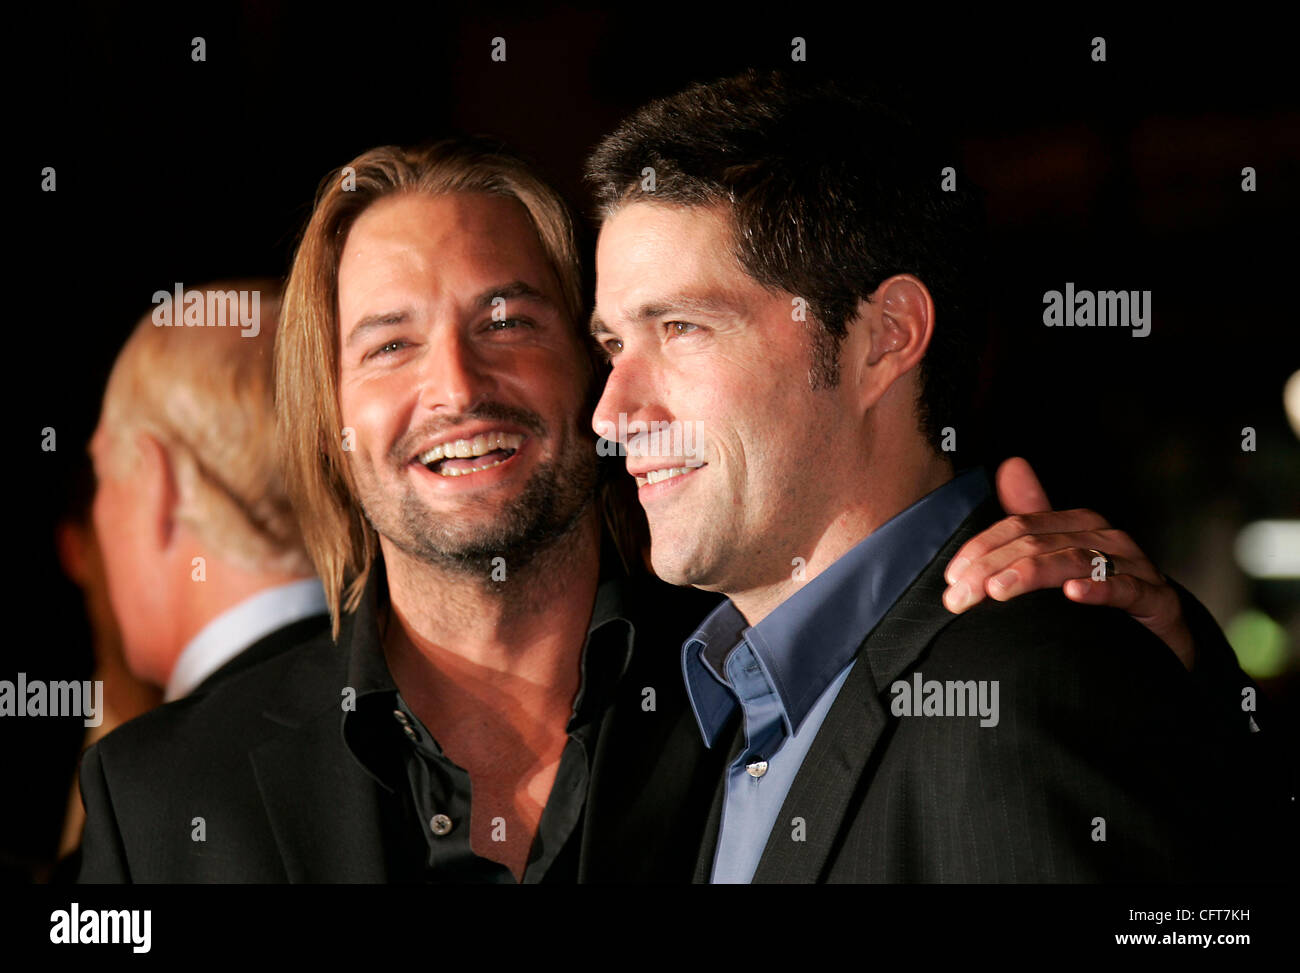 Dec 14, 2006; Hollywood, California, USA; Actors JOSH HOLLOWAY & MATTHEW FOX  arrives at the 'We Are Marshall' Los Angeles Premiere held at the Mann Chinese Theatre. Mandatory Credit: Photo by Lisa O'Connor/ZUMA Press. (©) Copyright 2006 by Lisa O'Connor Stock Photo